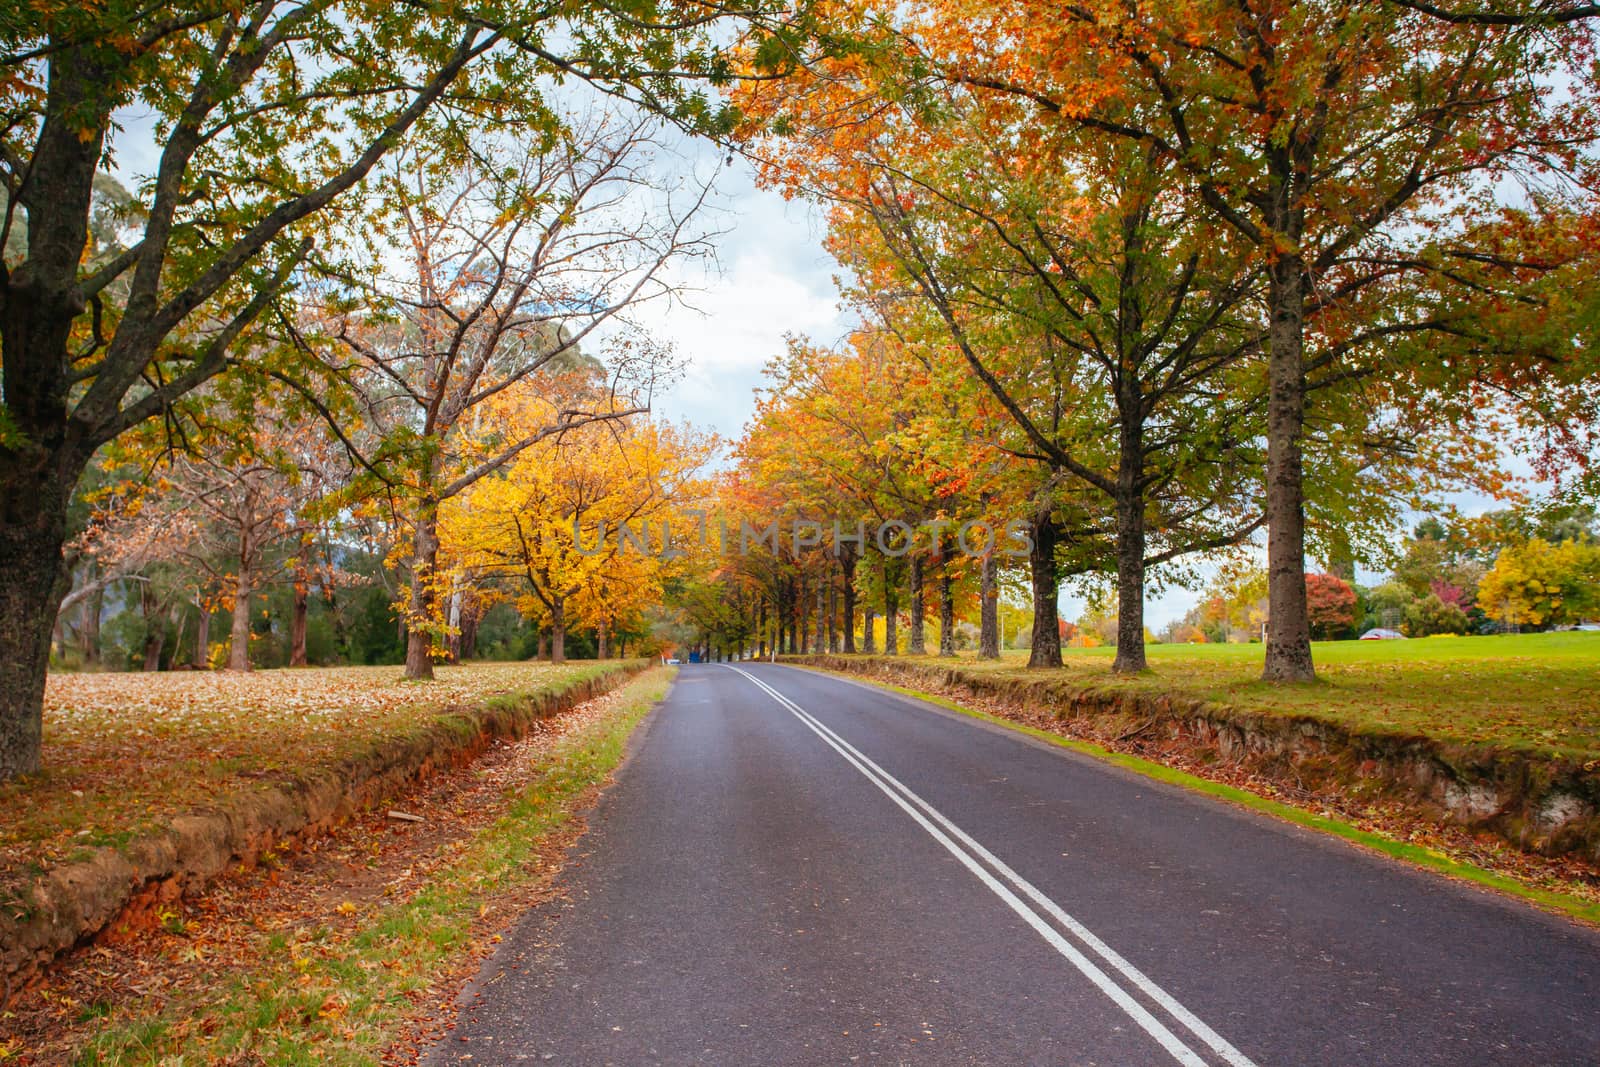 Alpine Way running thru Khancoban in autumn, with brilliant colour trees in New South Wales Australia